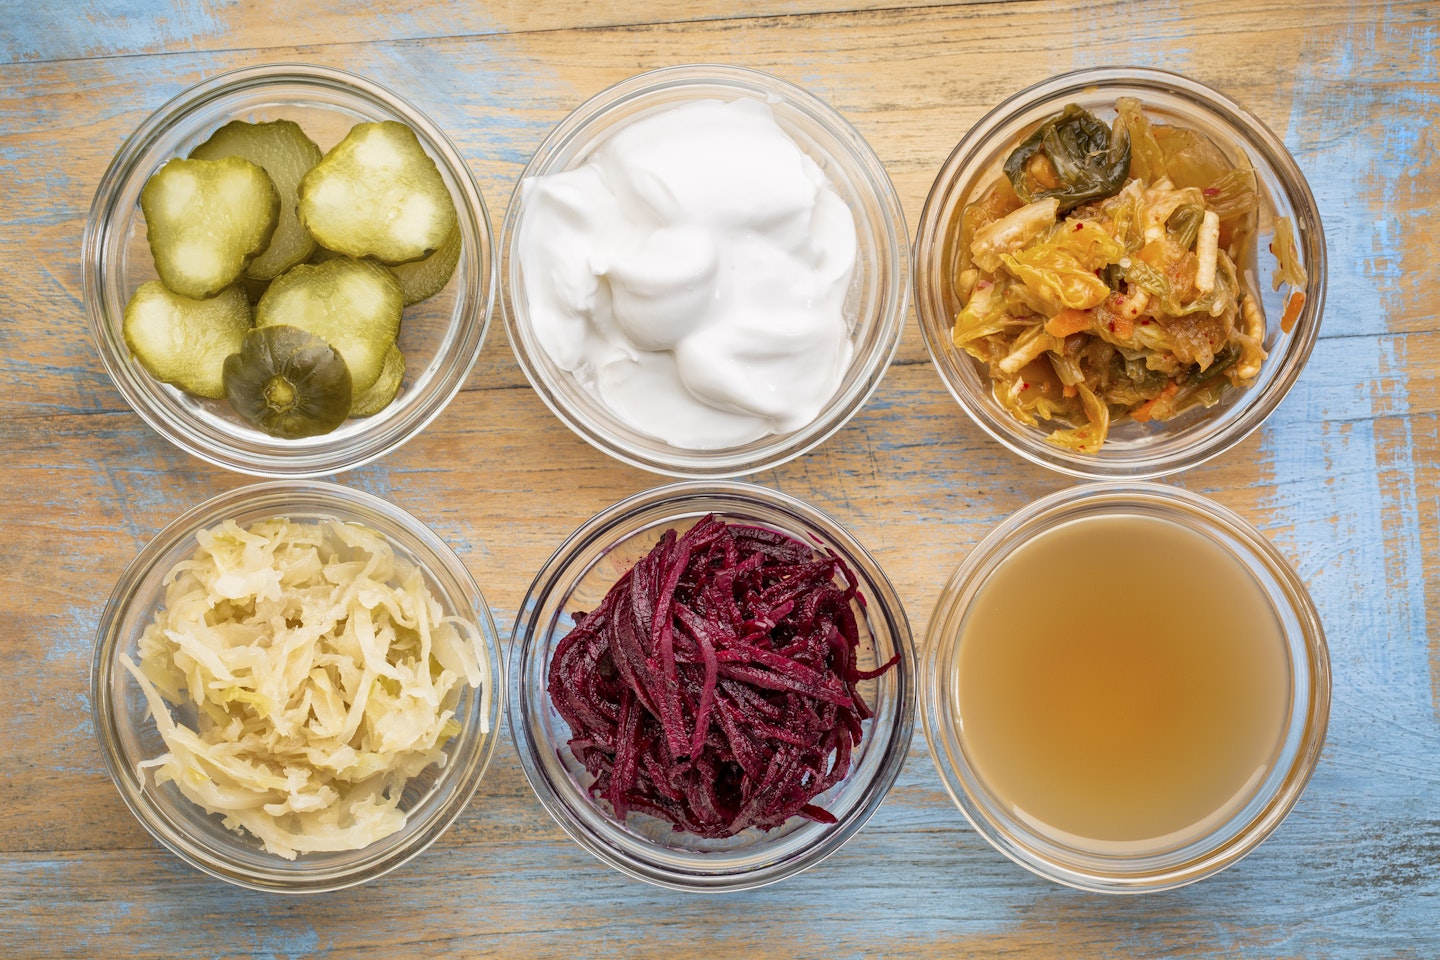 Bowls of fermented foods